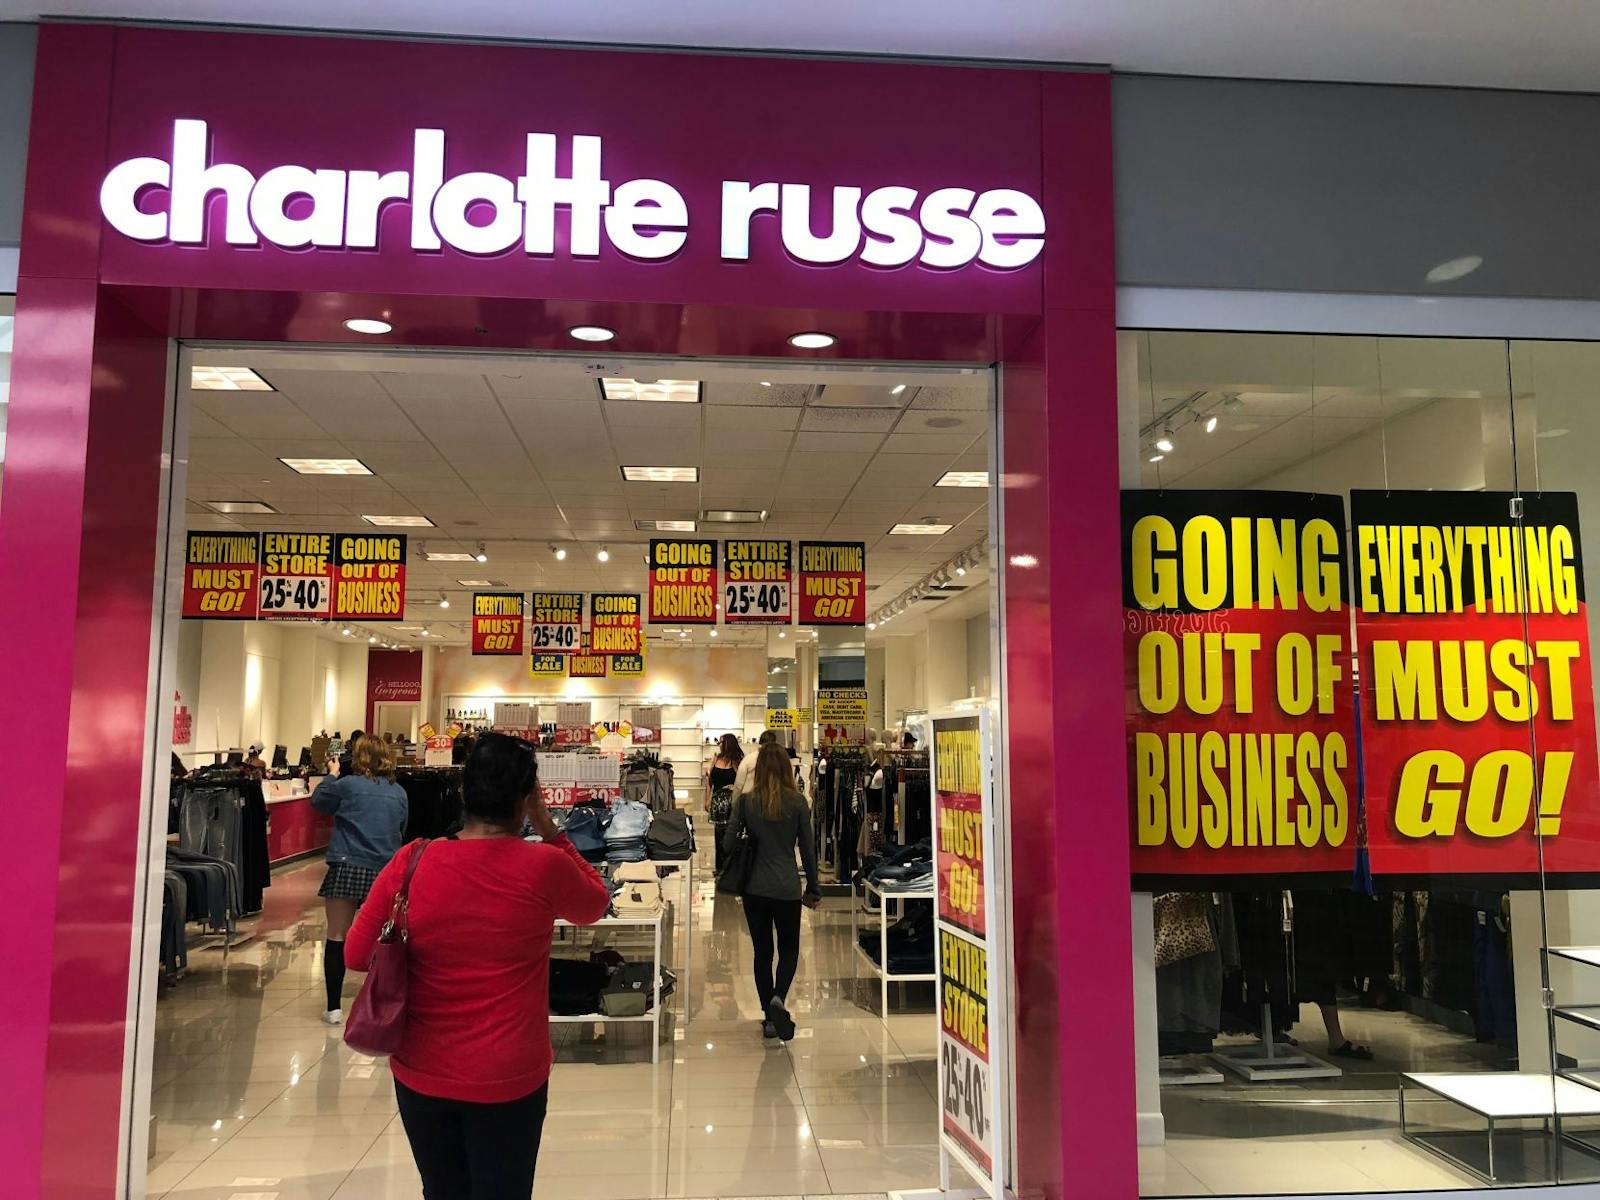 Charlotte Russe closing 94 stores nationwide, including 3 in Ohio